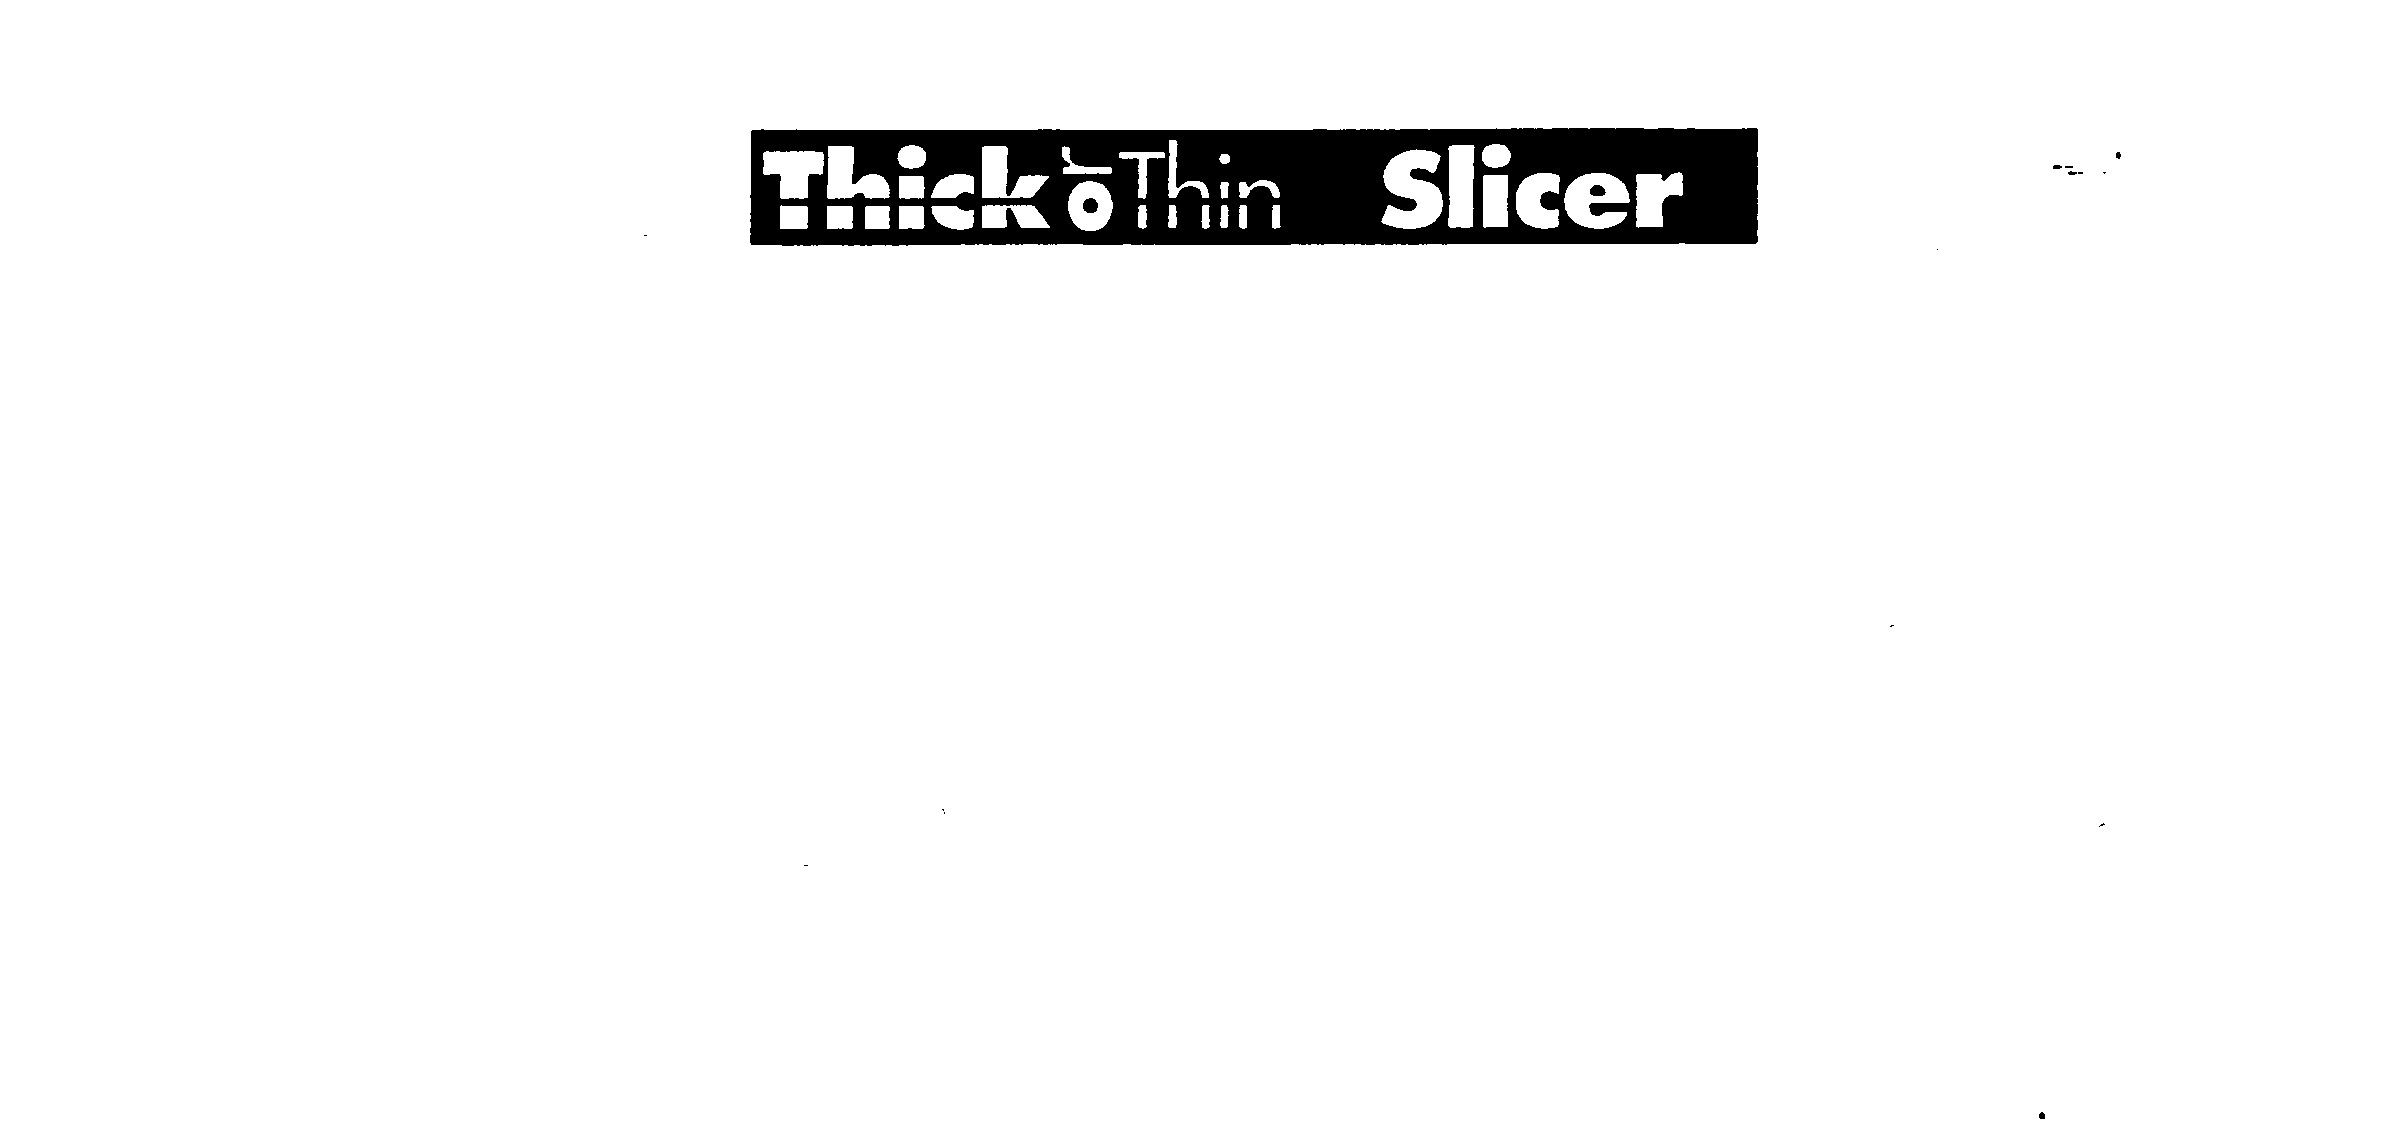  THICK OR THIN SLICER